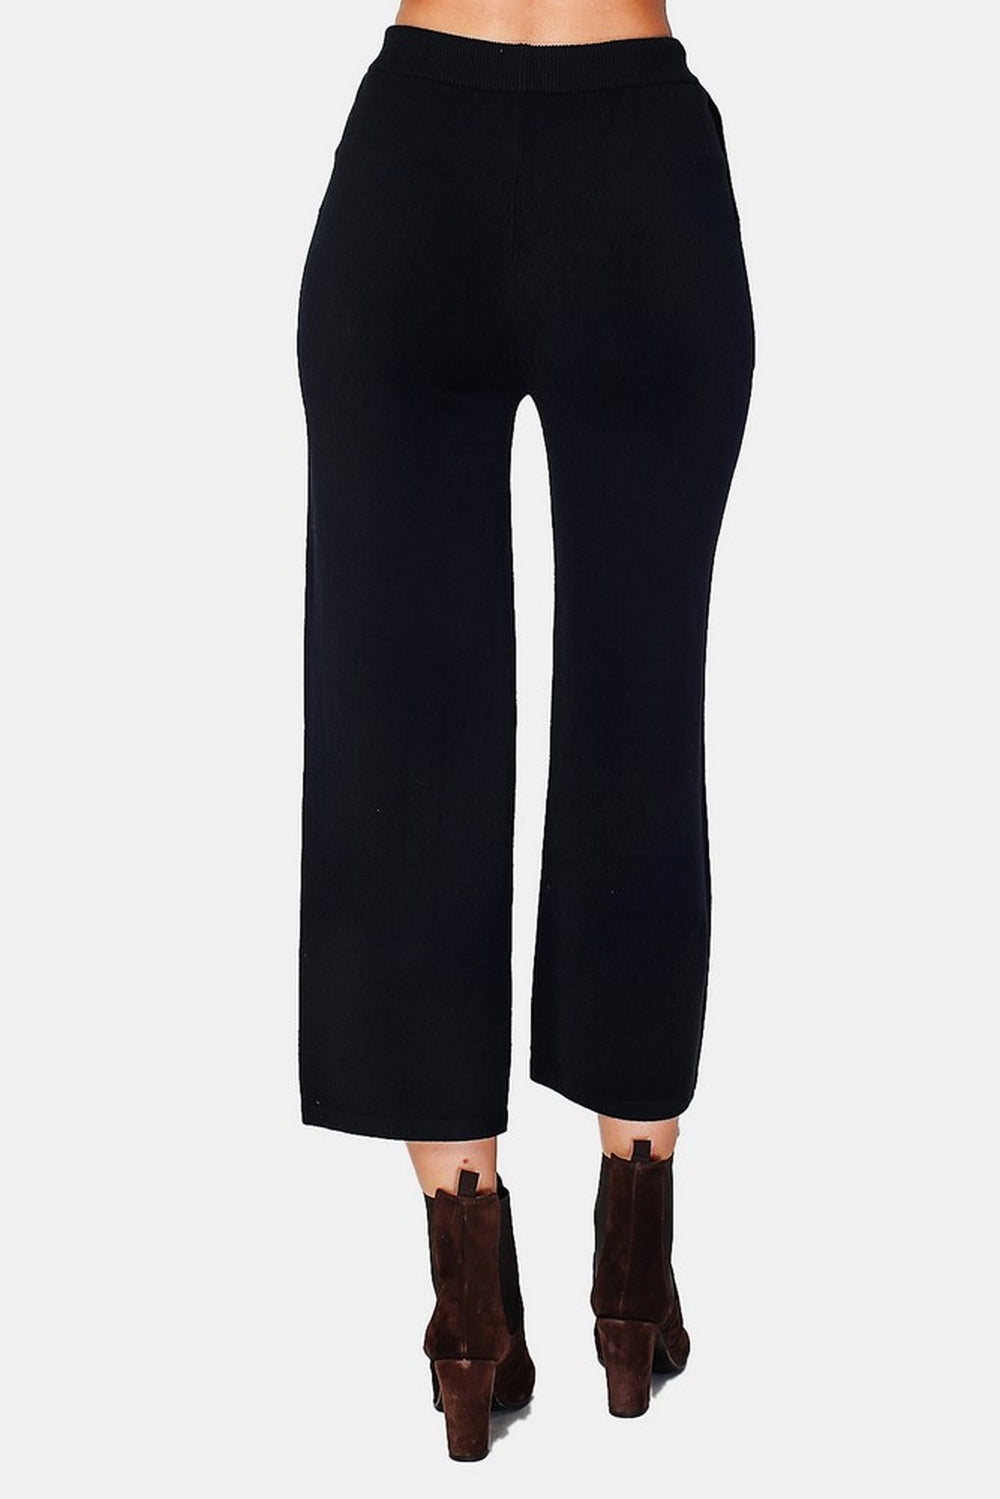 High-waisted knitted knit pants, wide bottom, front patch pockets